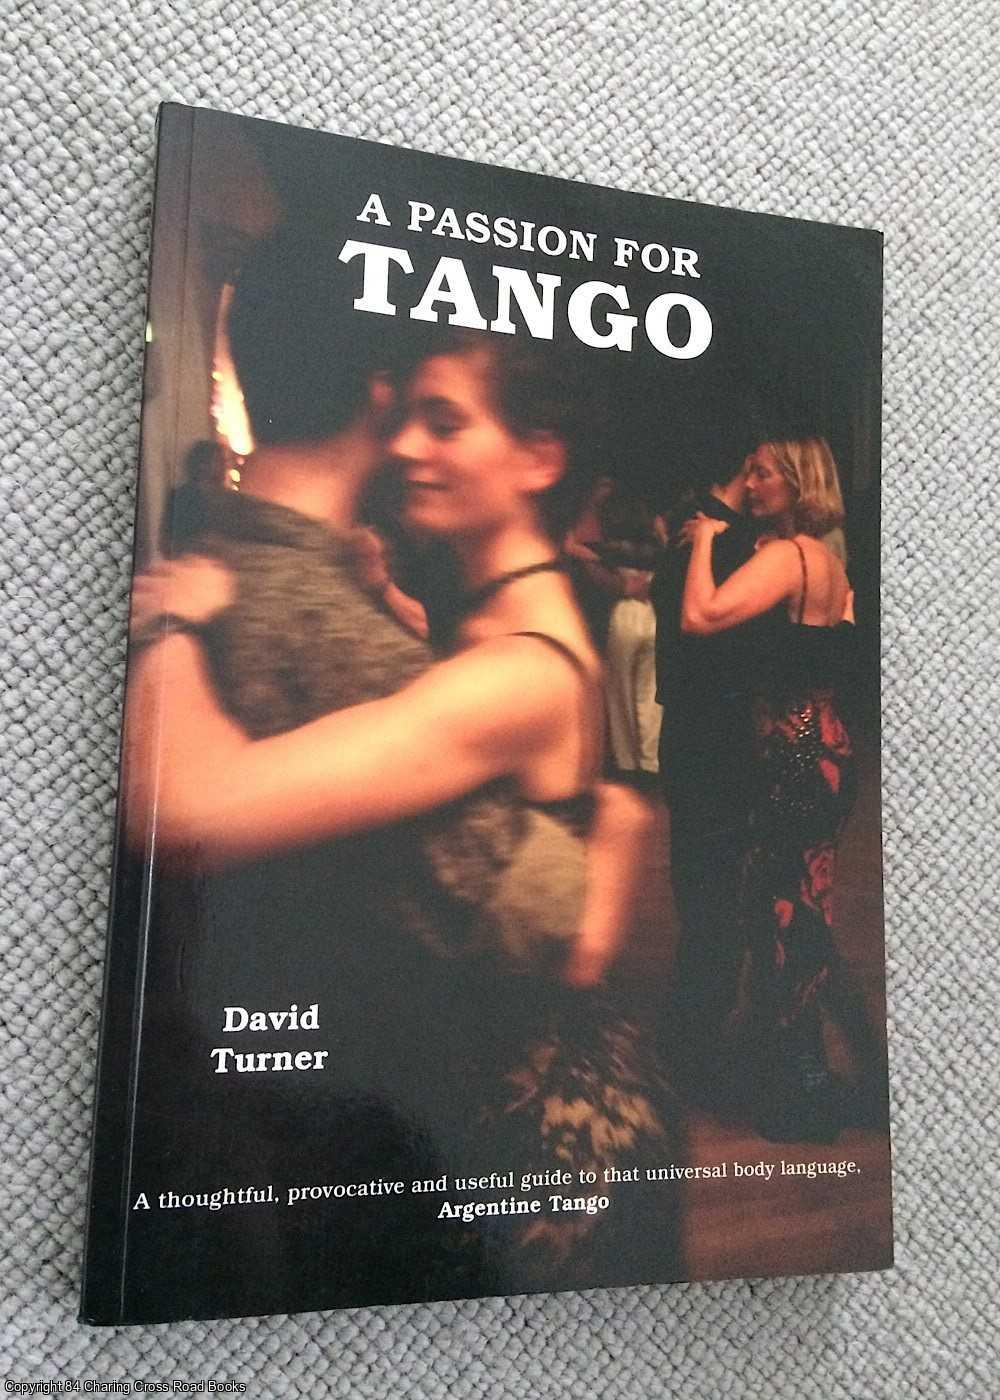 David Turner - A Passion for Tango: A Thoughtful, Provocative and Useful Guide to That Universal Body Language - Argentine Tango